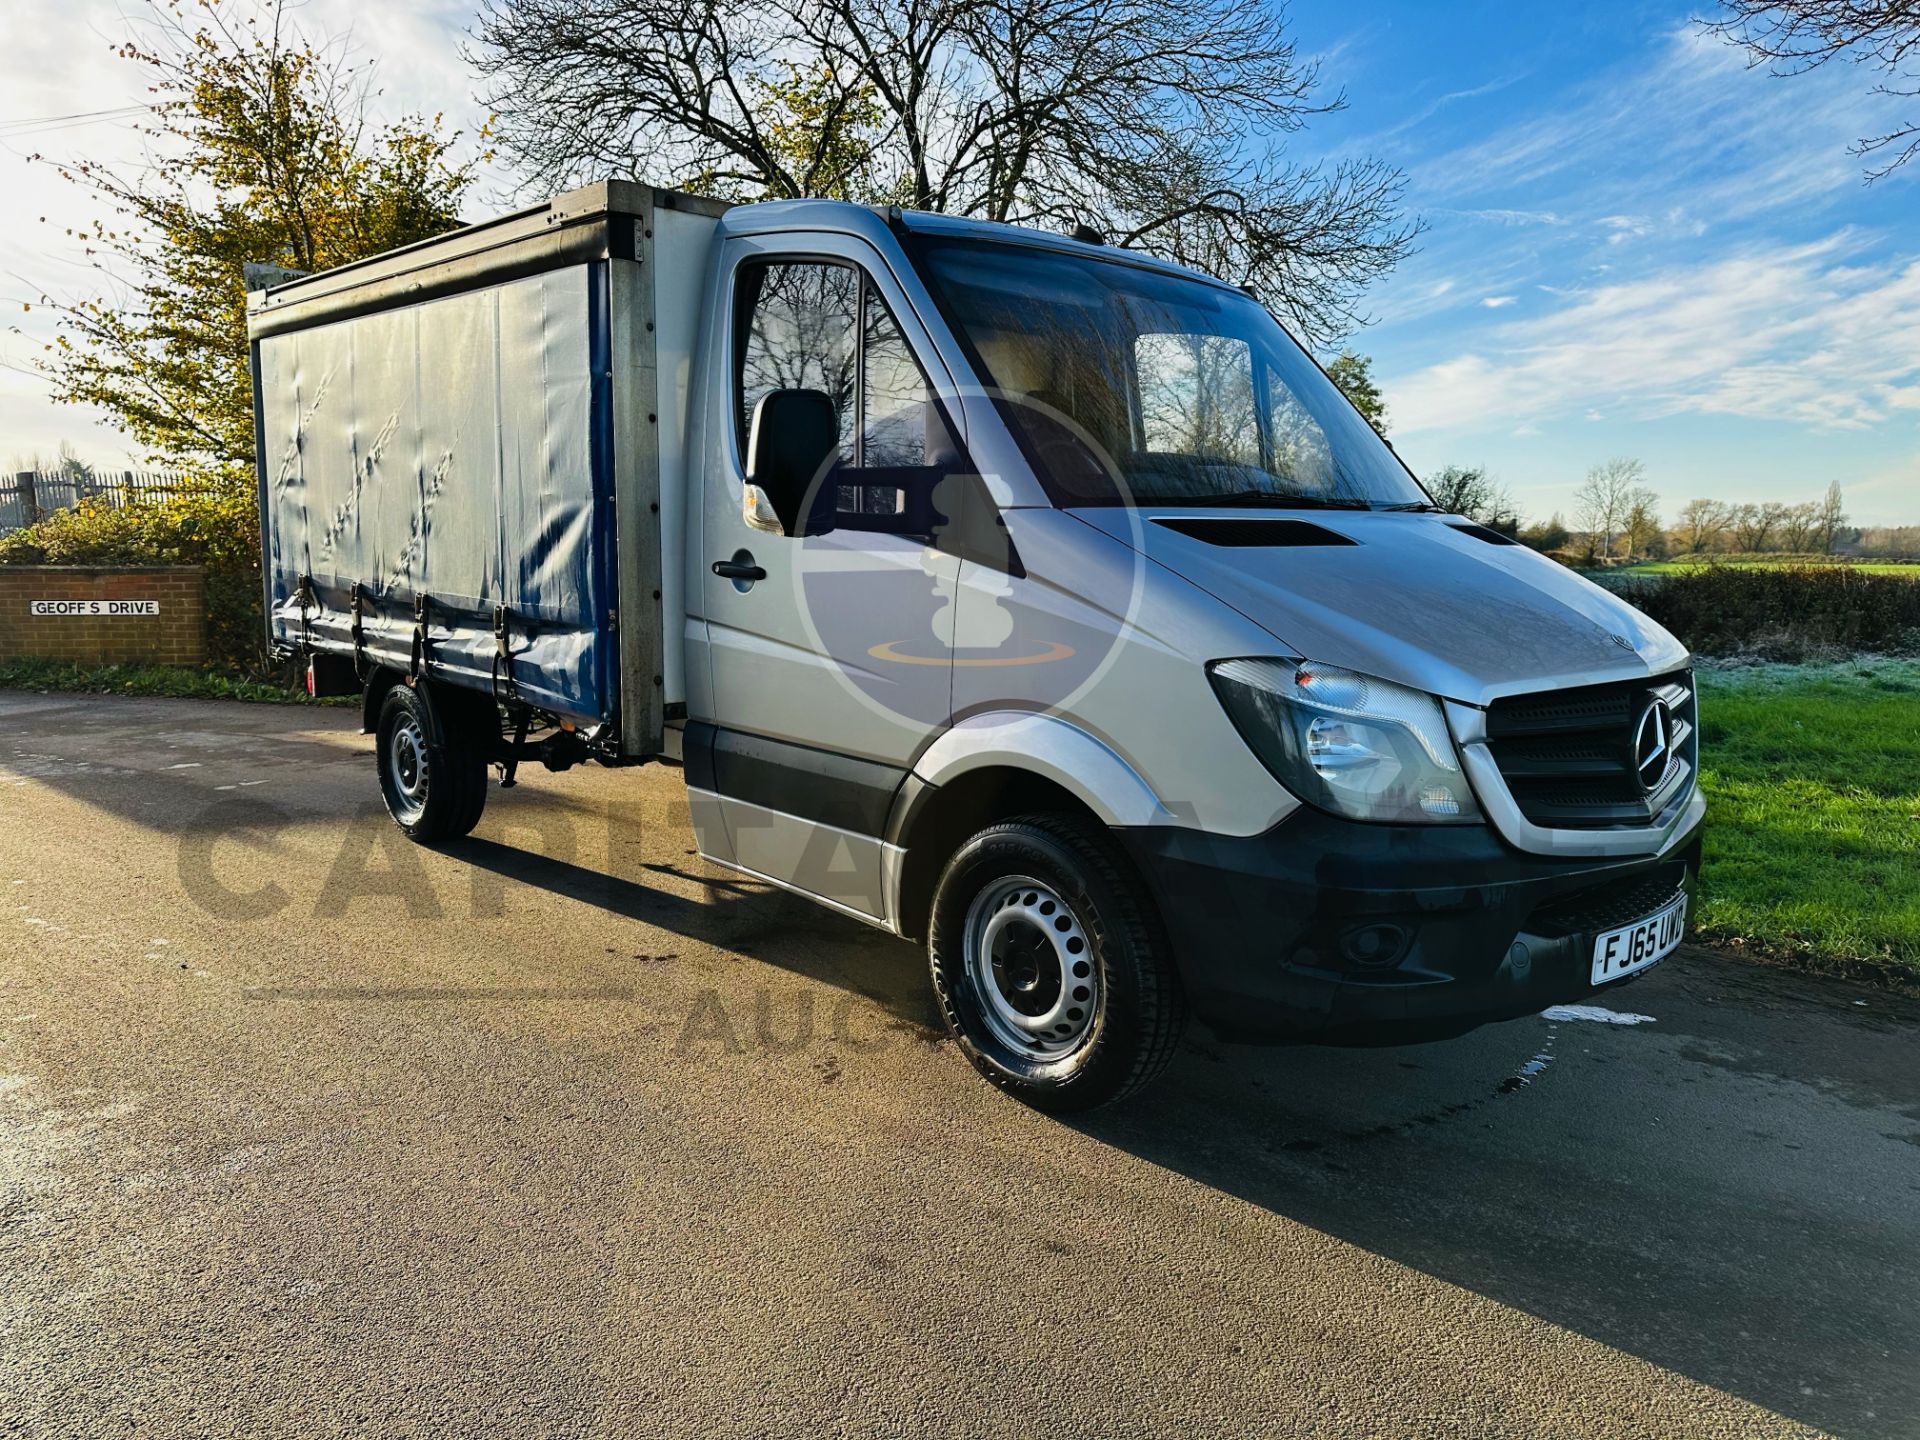 MERCEDES-BENZ SPRINTER 313 CDI - *LWB CURTAINSIDER TRUCK* - 2016 MODEL - 3 SEATER CABIN - AIR CON!!! - Image 2 of 26